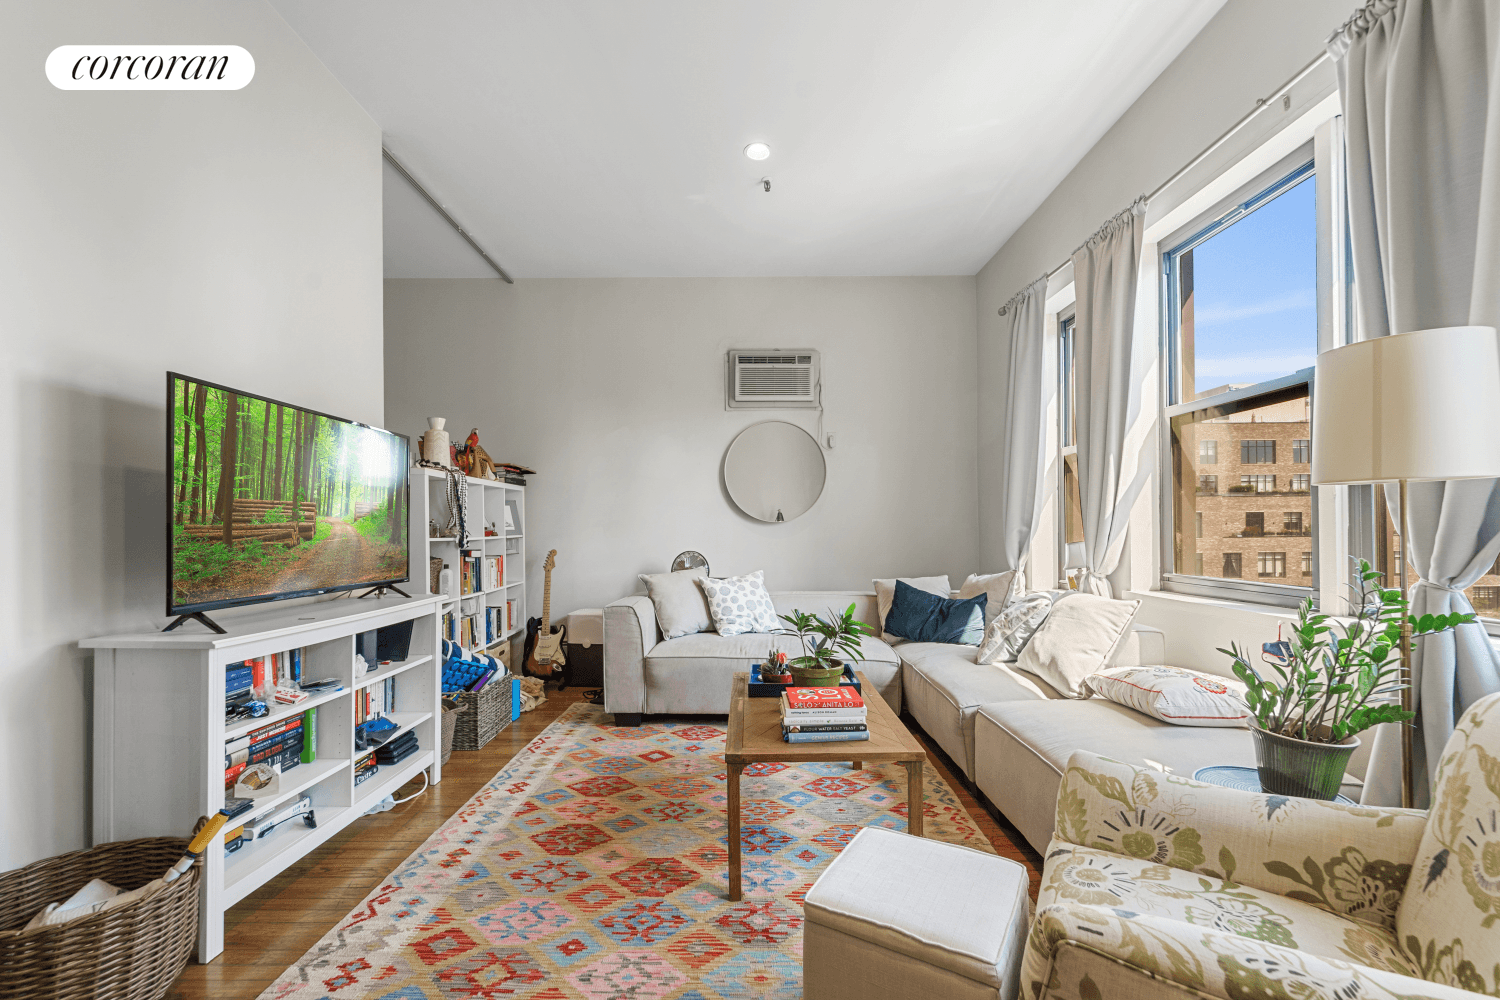 The quintessential XL 1 bedroom Brooklyn loft style apartment has arrived !